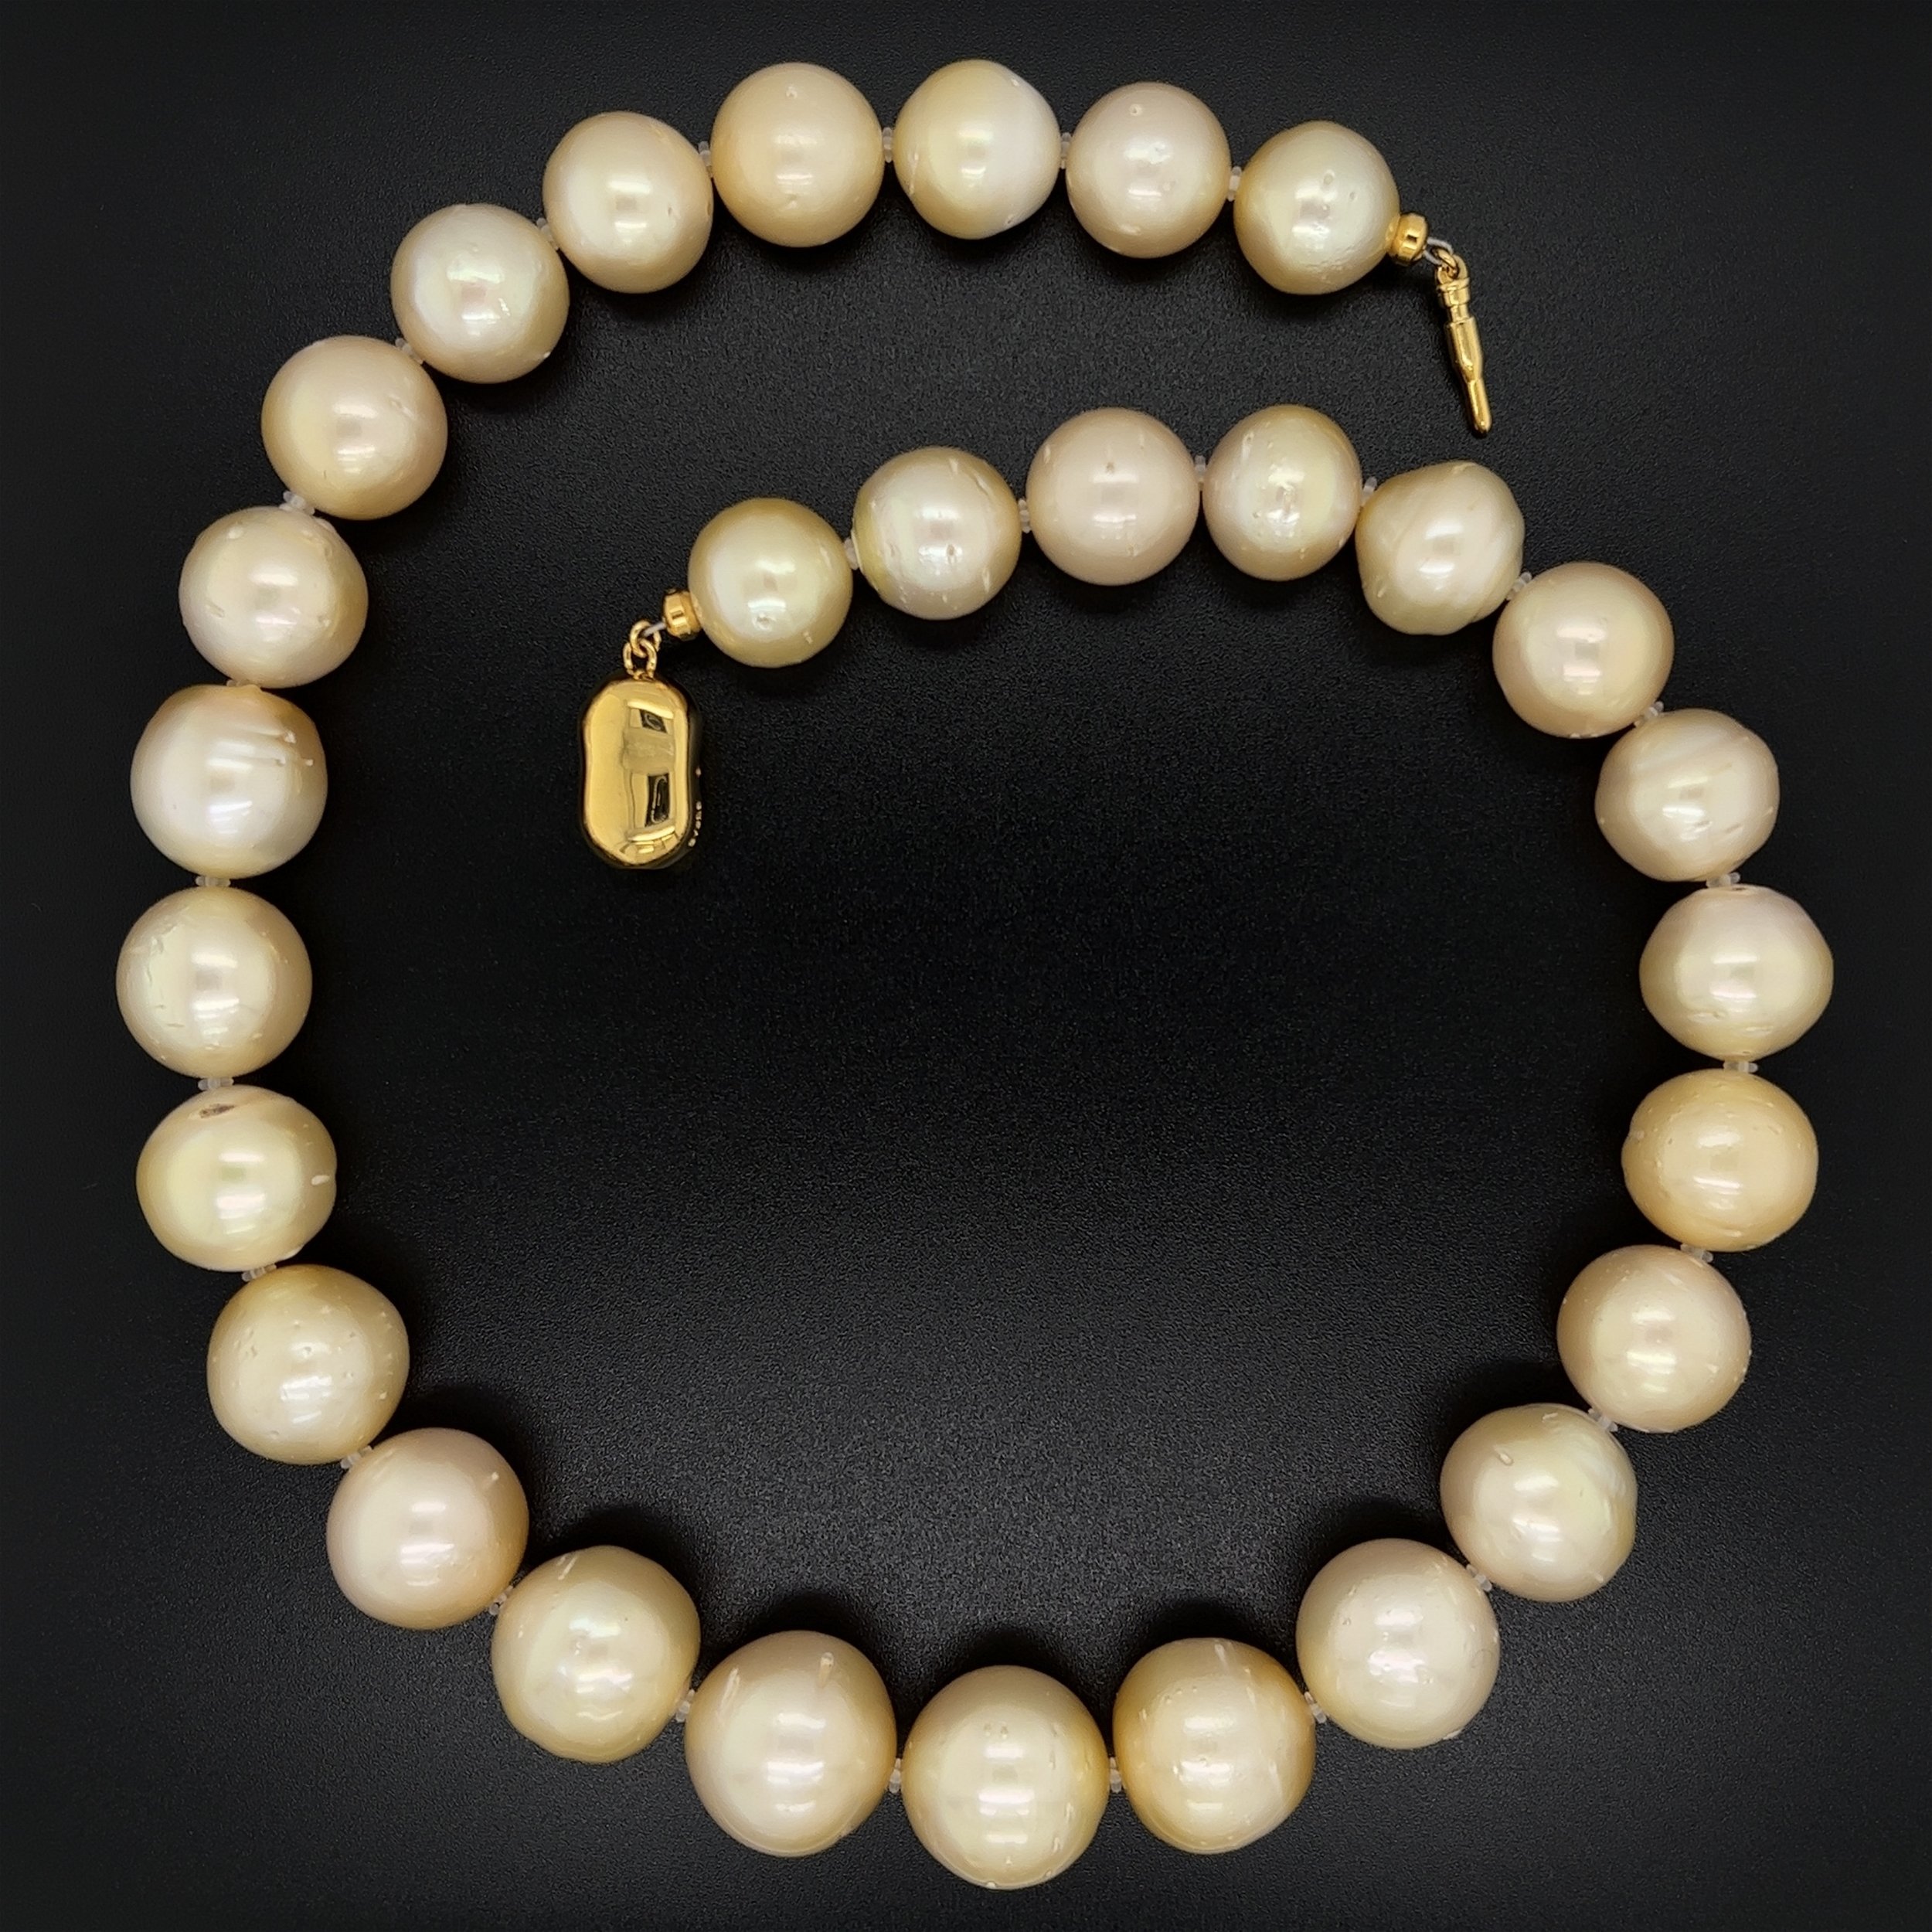 South Sea Golden Pearl Necklace 15.8 - 12.3mm Natural Blemishes on 925 YG Clasp 109.8g, 17"